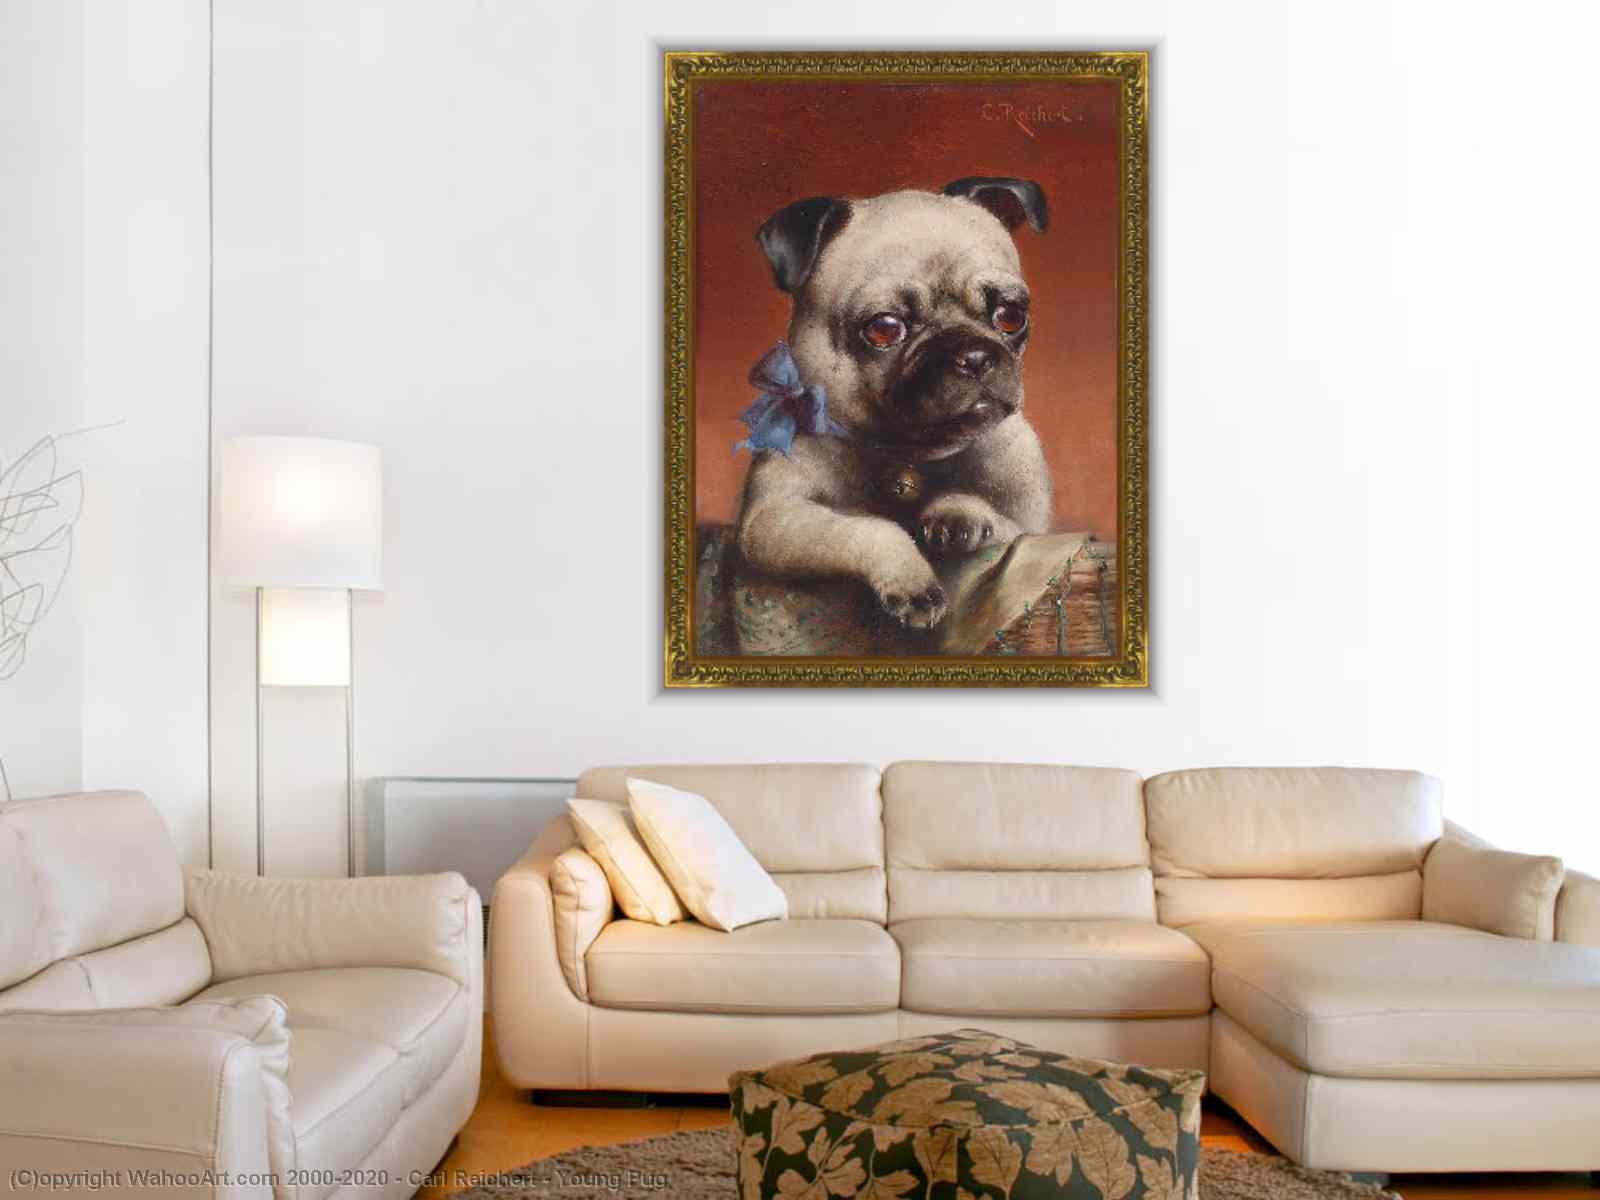 Art Reproductions Young Pug by Carl Reichert (1836-1918, Germany ...